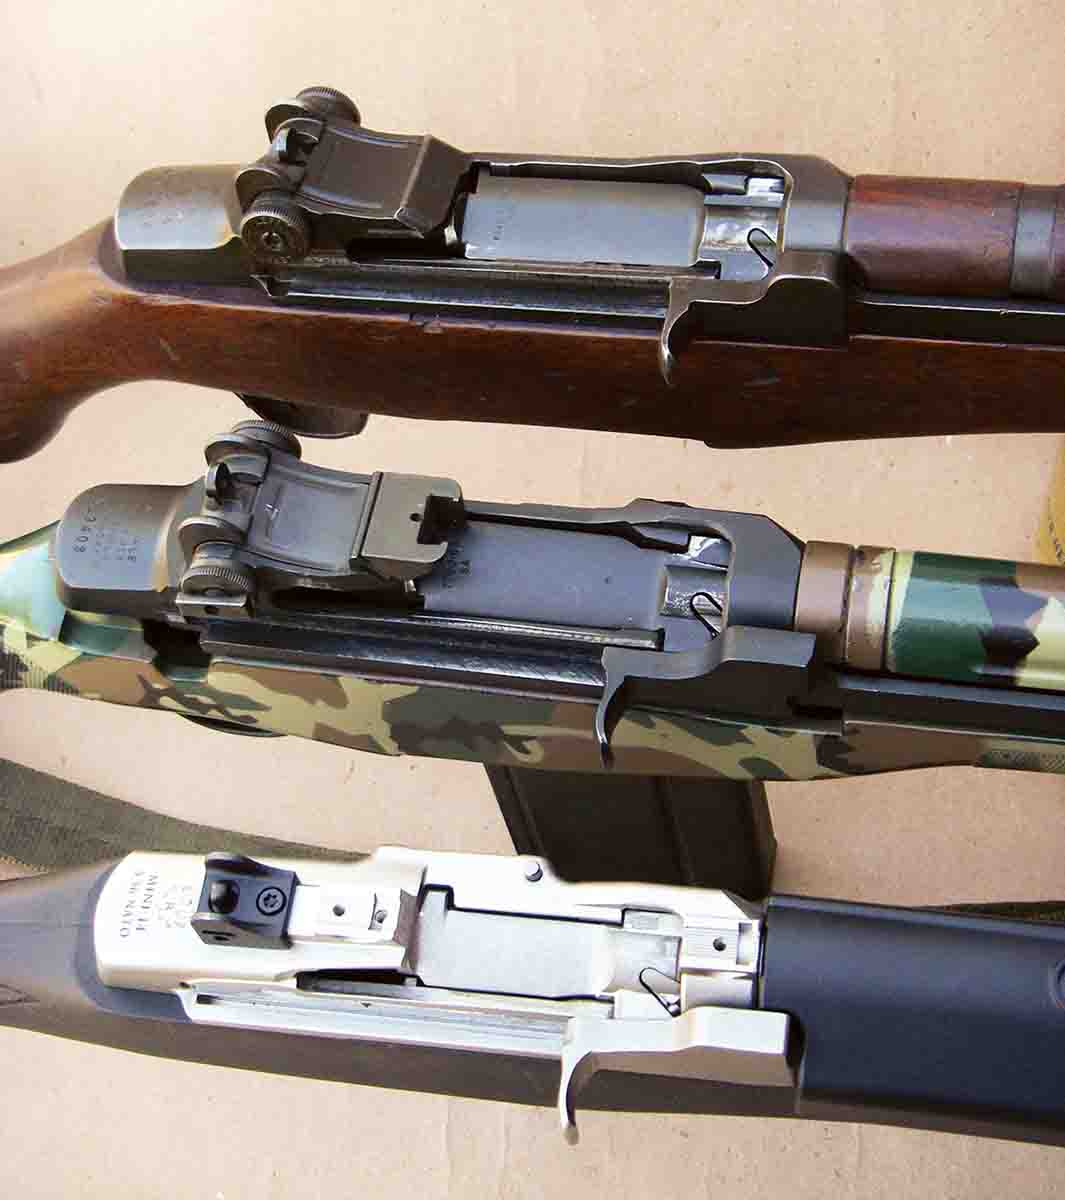 Although there are notable design differences between the M1 Garand (top), the M14/M1A (middle) and the Mini-14 (bottom), the basic design and function is similar.